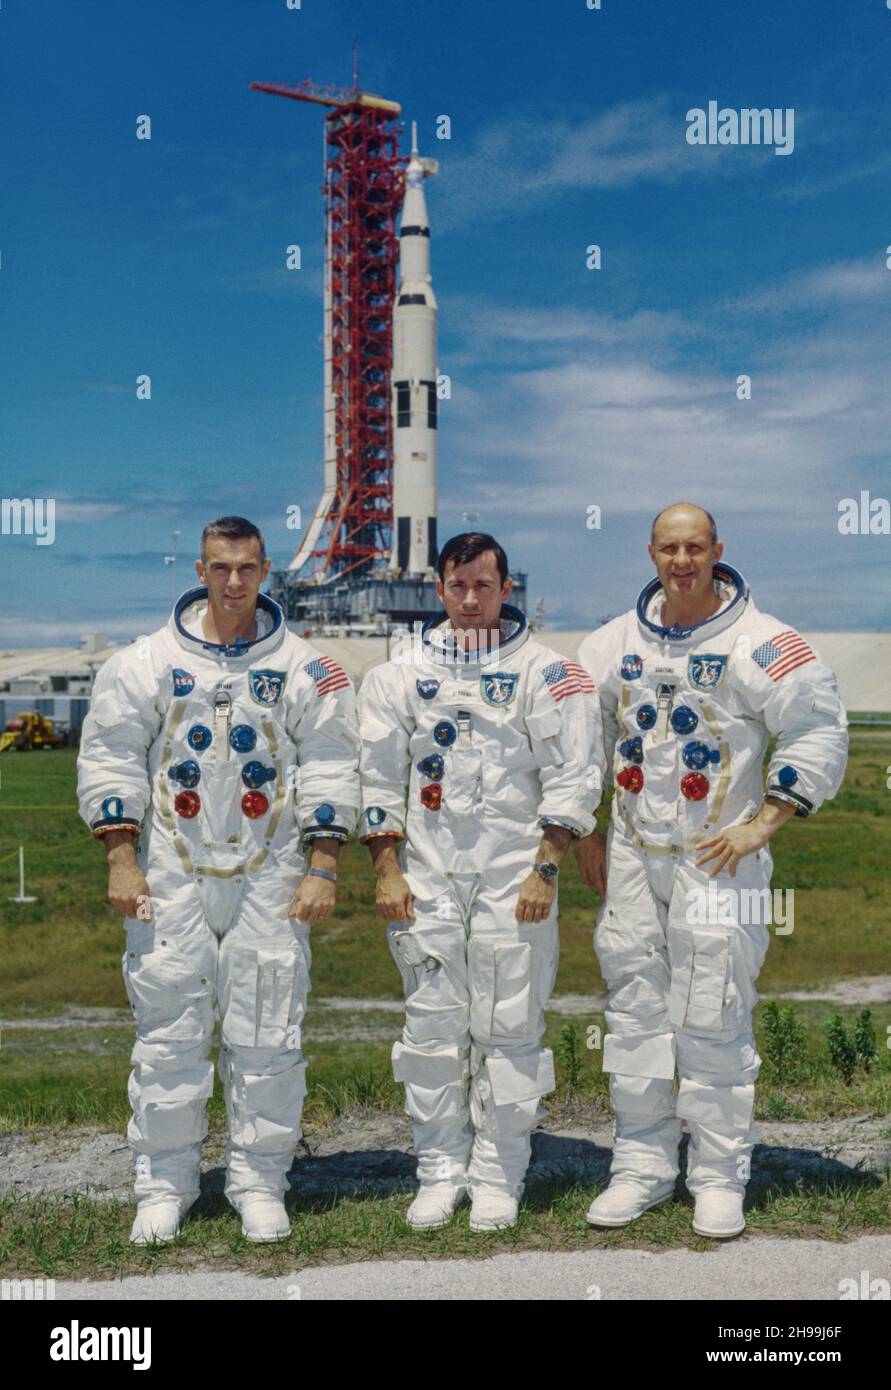 Prime crew of the Apollo 10 lunar orbit mission. Left to right, are Eugene A. Cernan, lunar module pilot; John W. Young, command module pilot; and Thomas P. Stafford, commander. In the background is the Apollo 10 space vehicle on Pad B, Launch Complex 39, Kennedy Space Center, Florida. Stock Photo